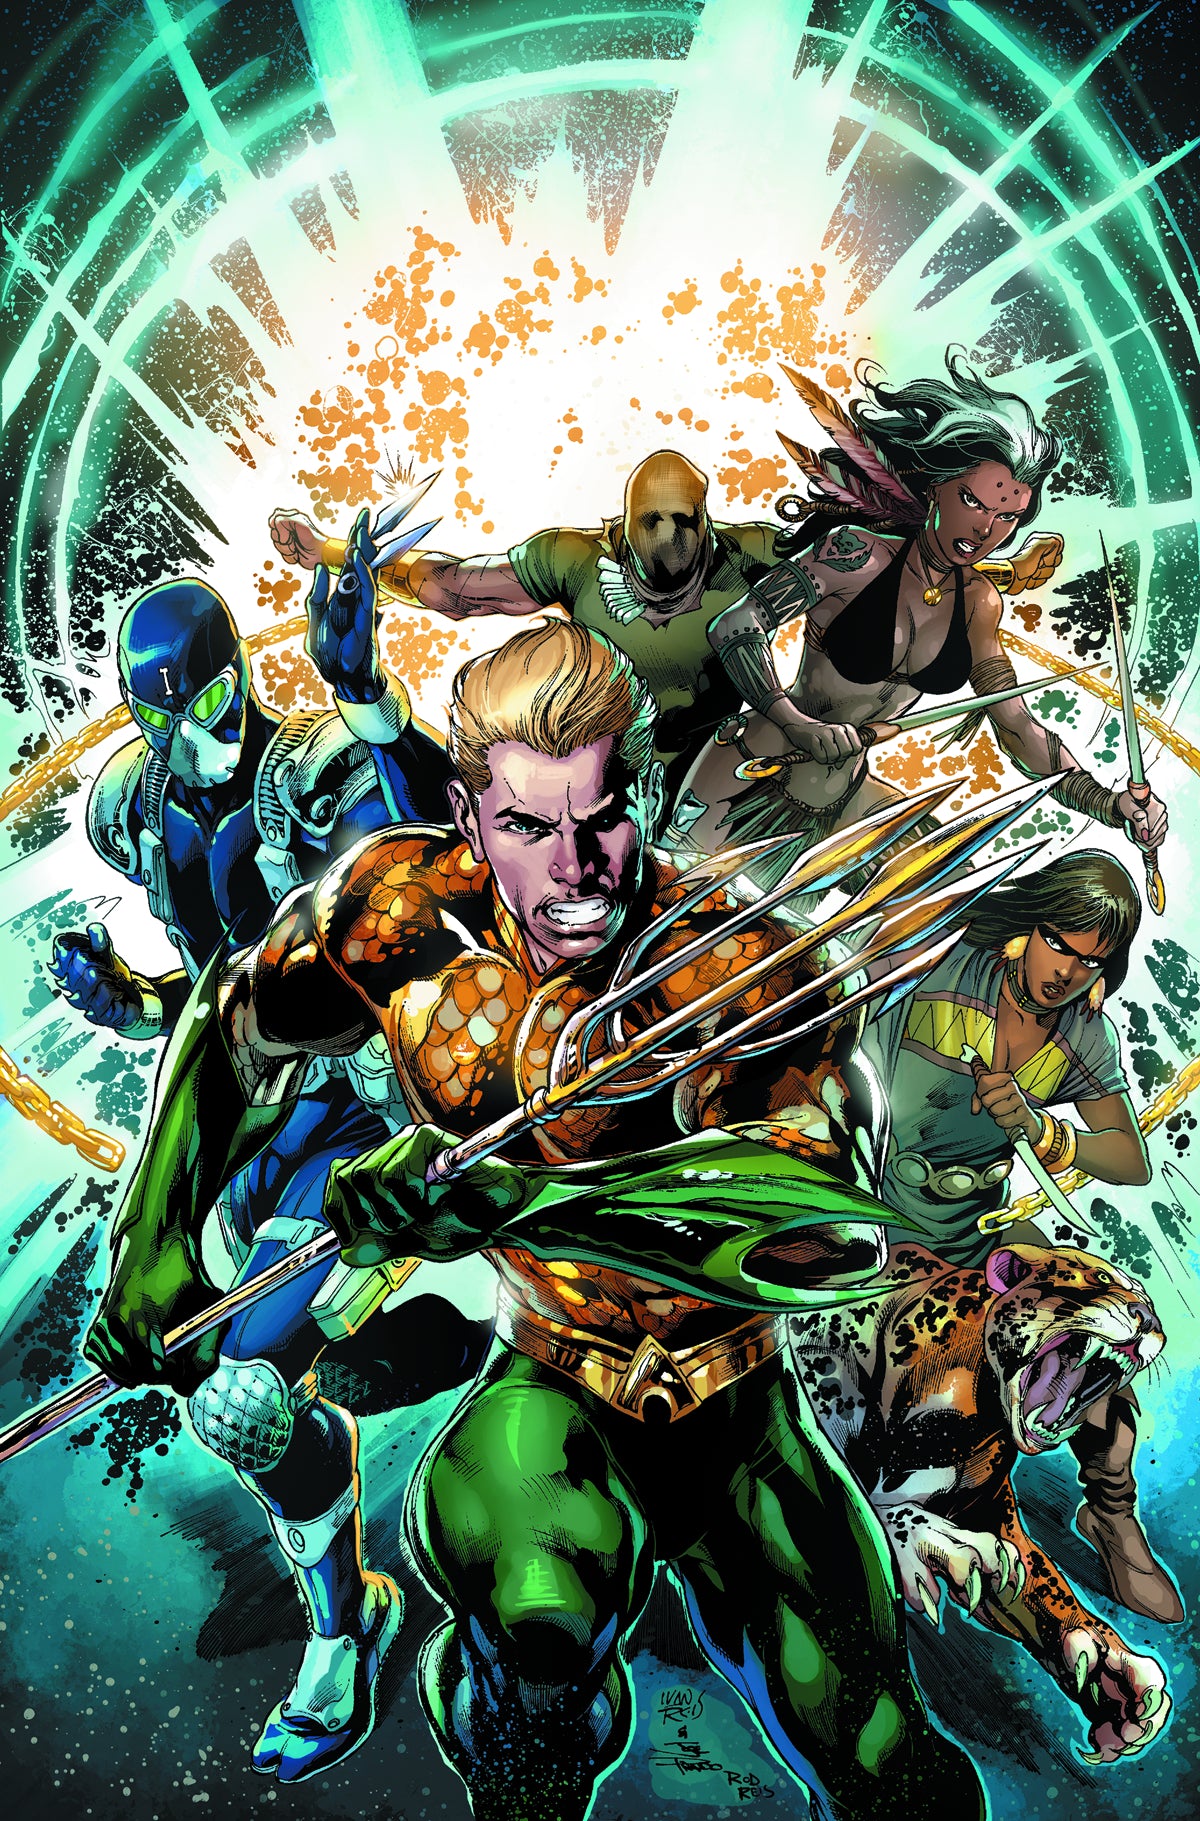 Photo of Aquaman & the Others Issue 1 comic sold by Stronghold Collectibles